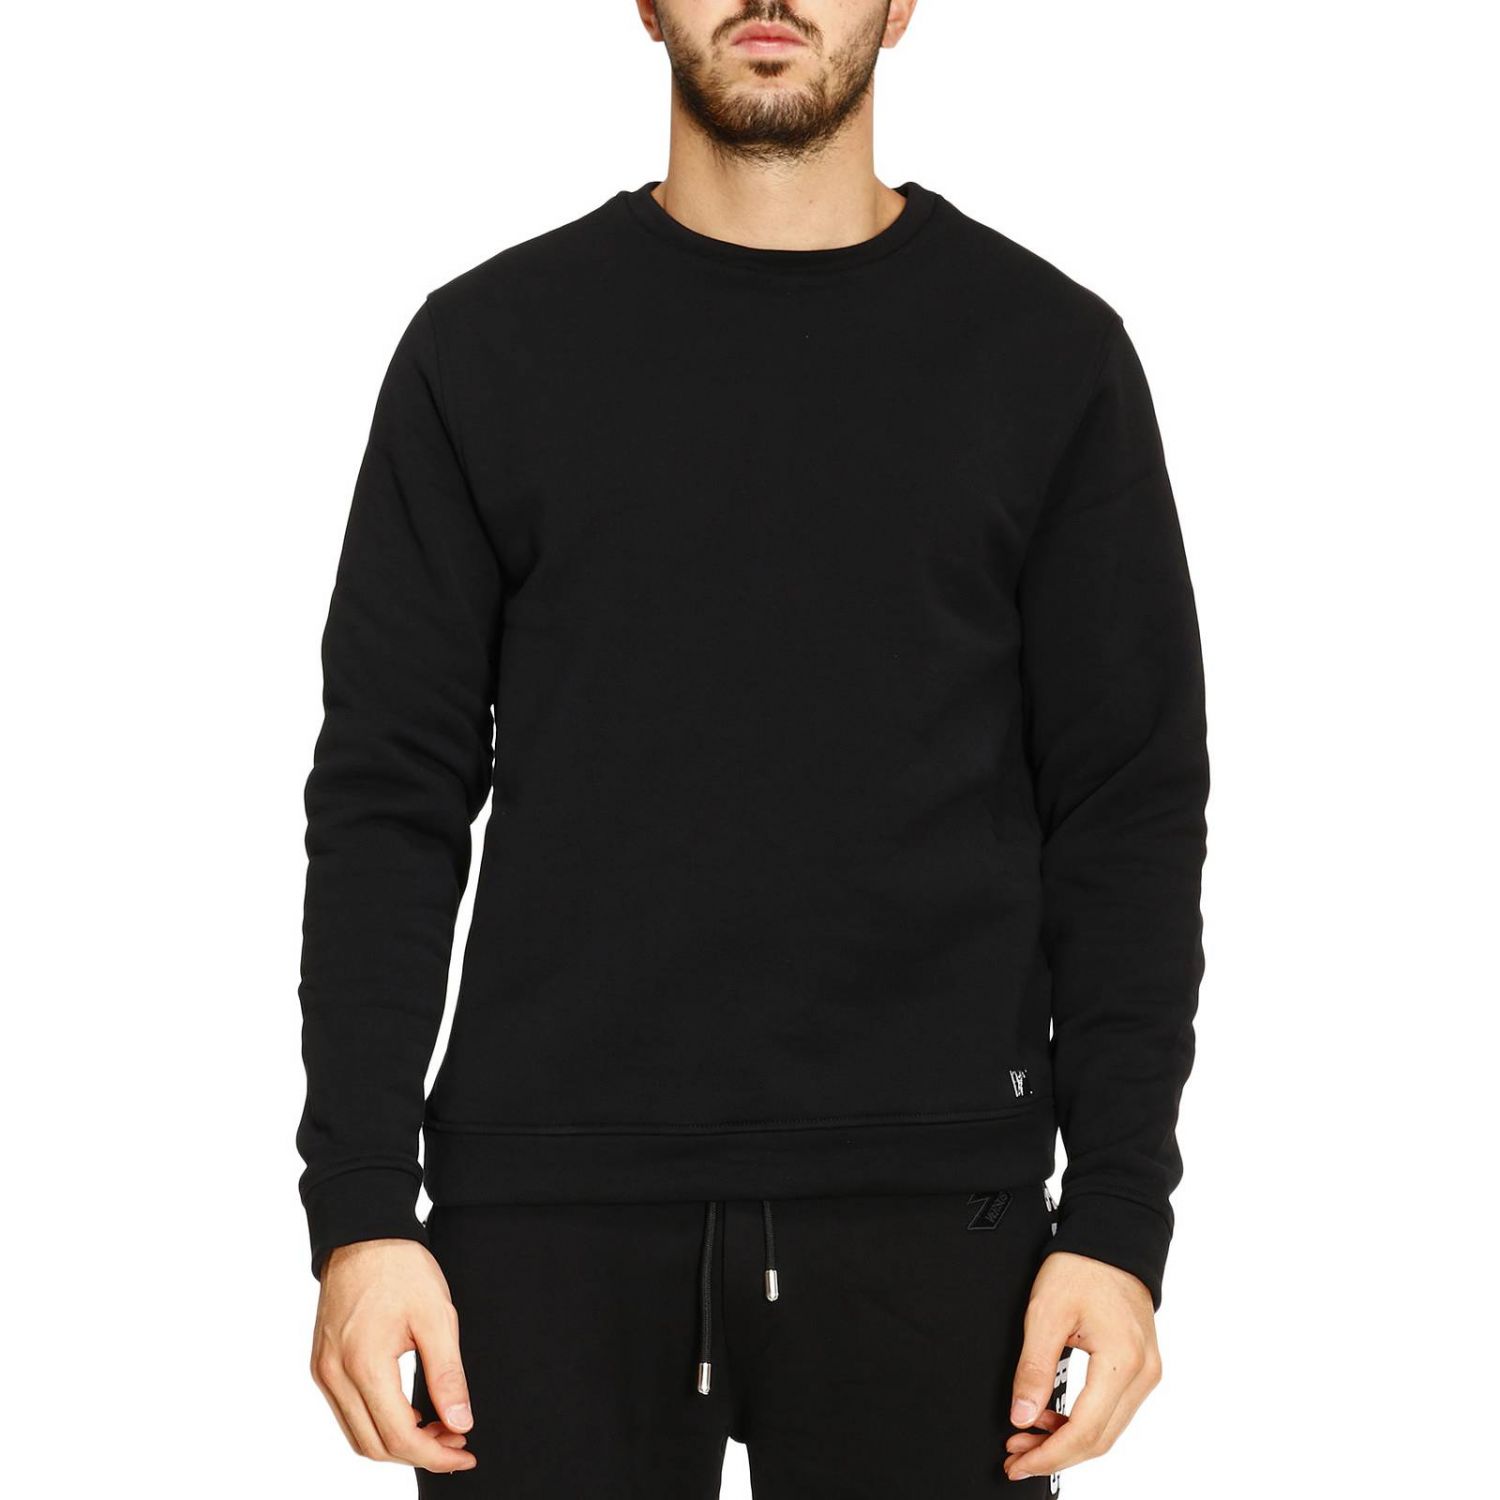 Versace Collection Outlet: Sweater men | Sweatshirt Versace Collection ...